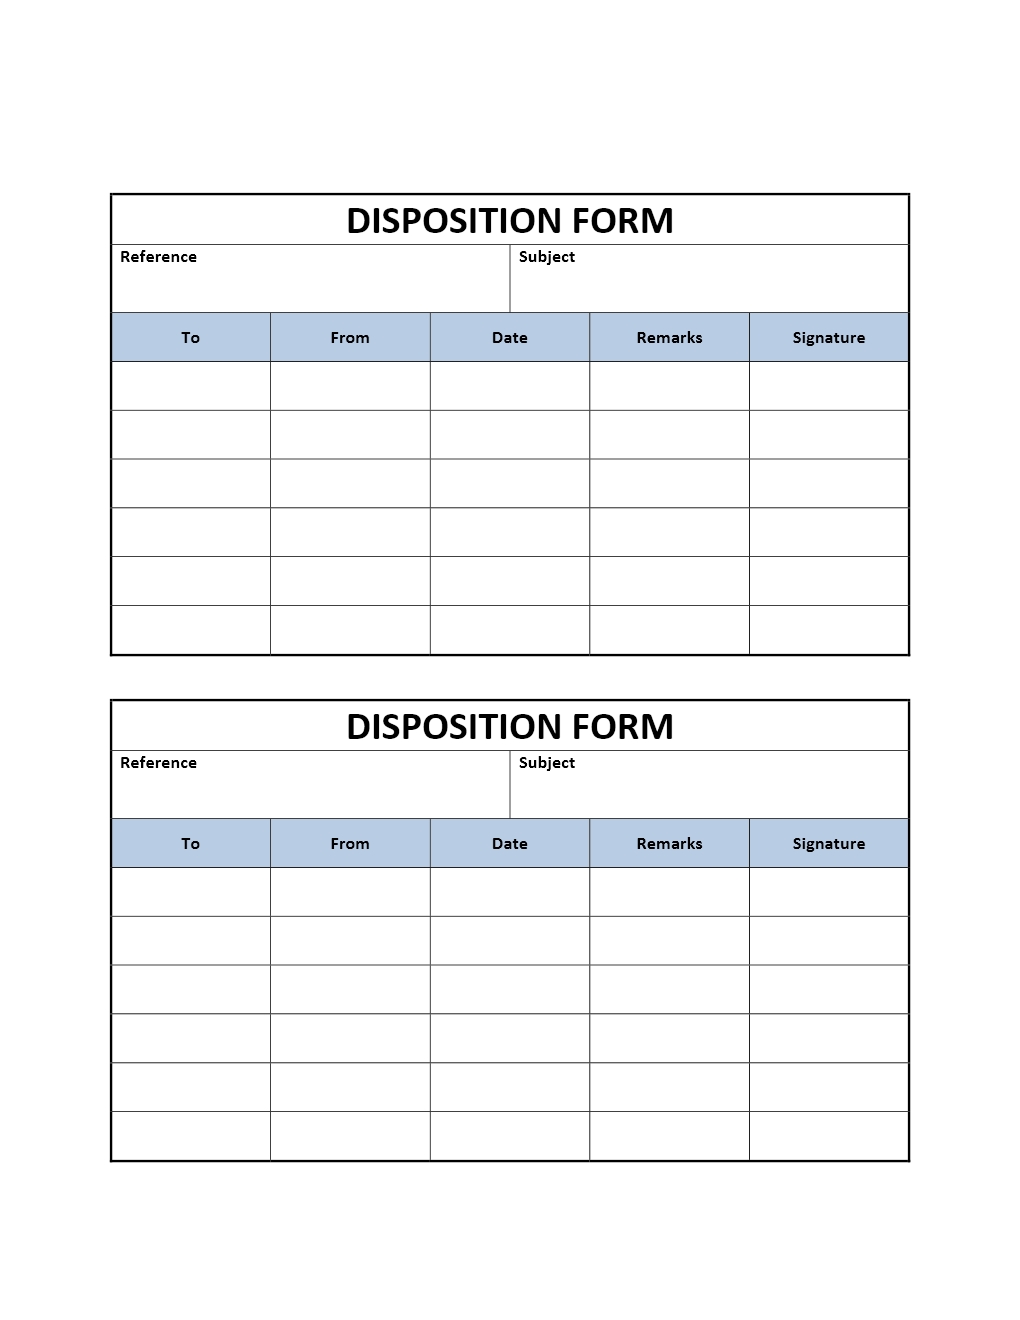 Disposition Form Template